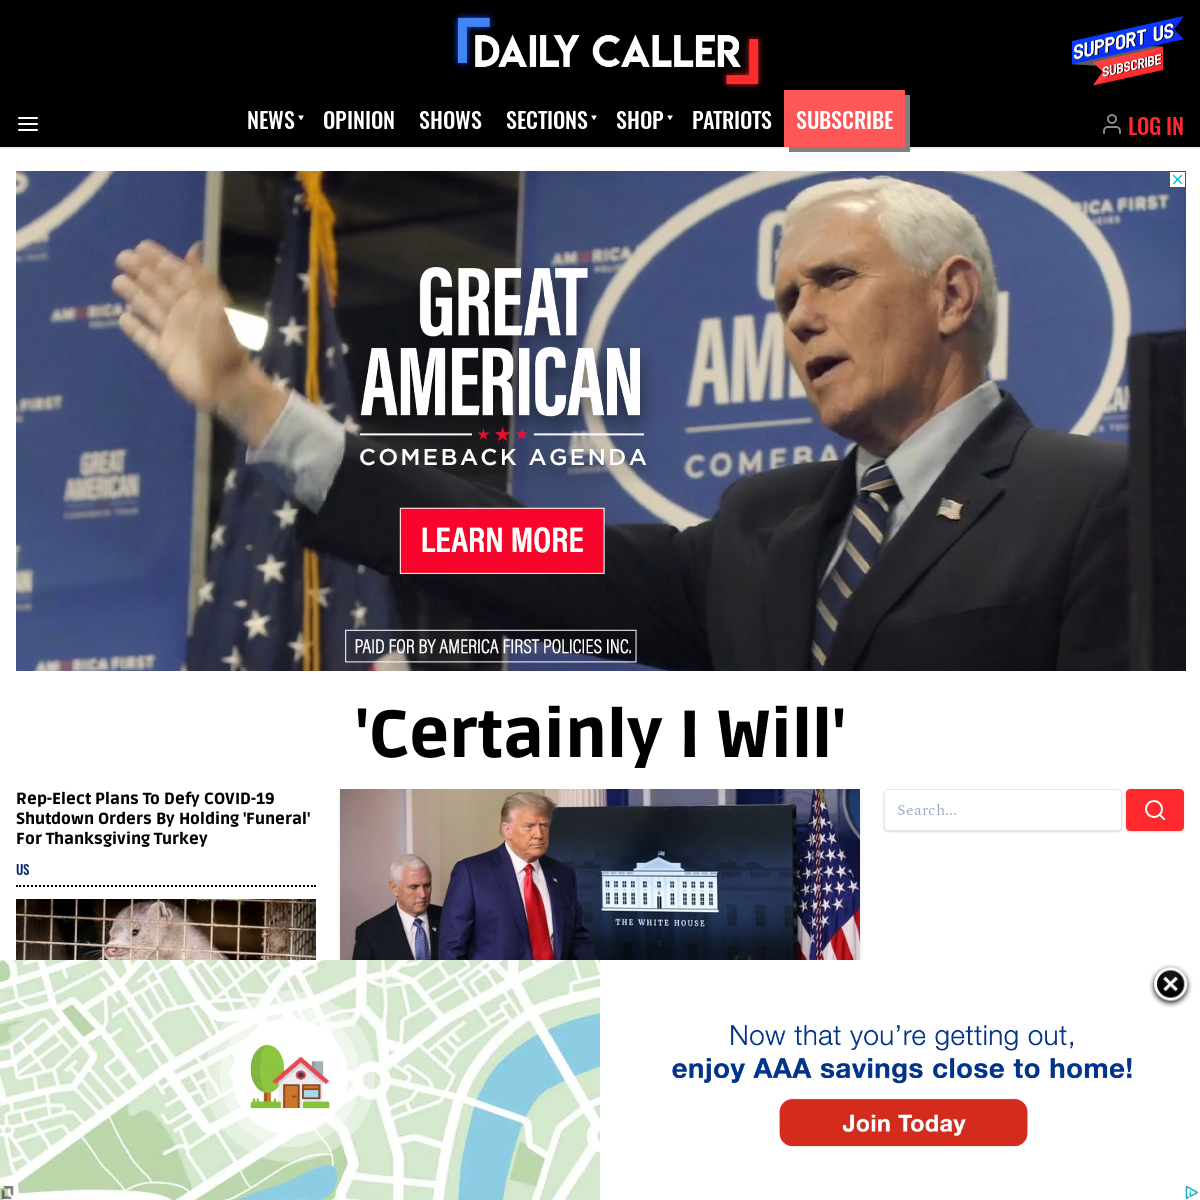 A complete backup of dailycaller.com